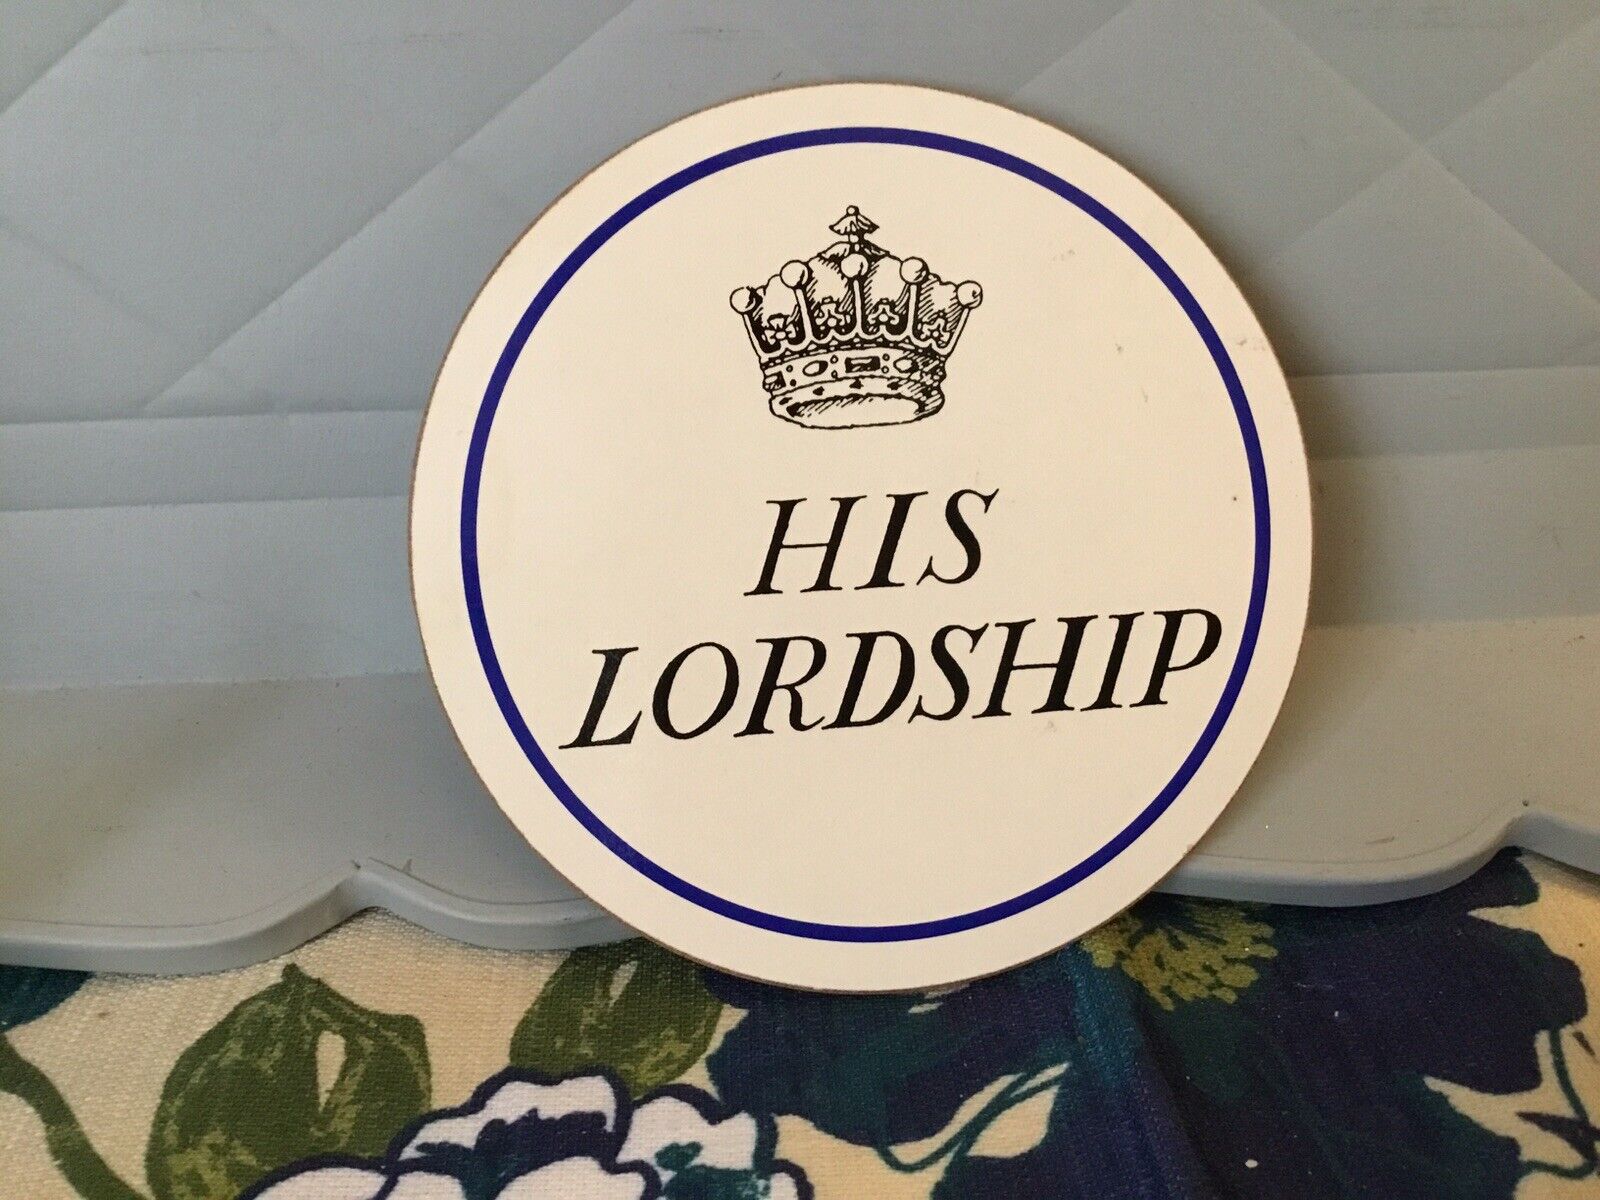  Coaster England “His Lordship” Coaster Staffordshire National Trust